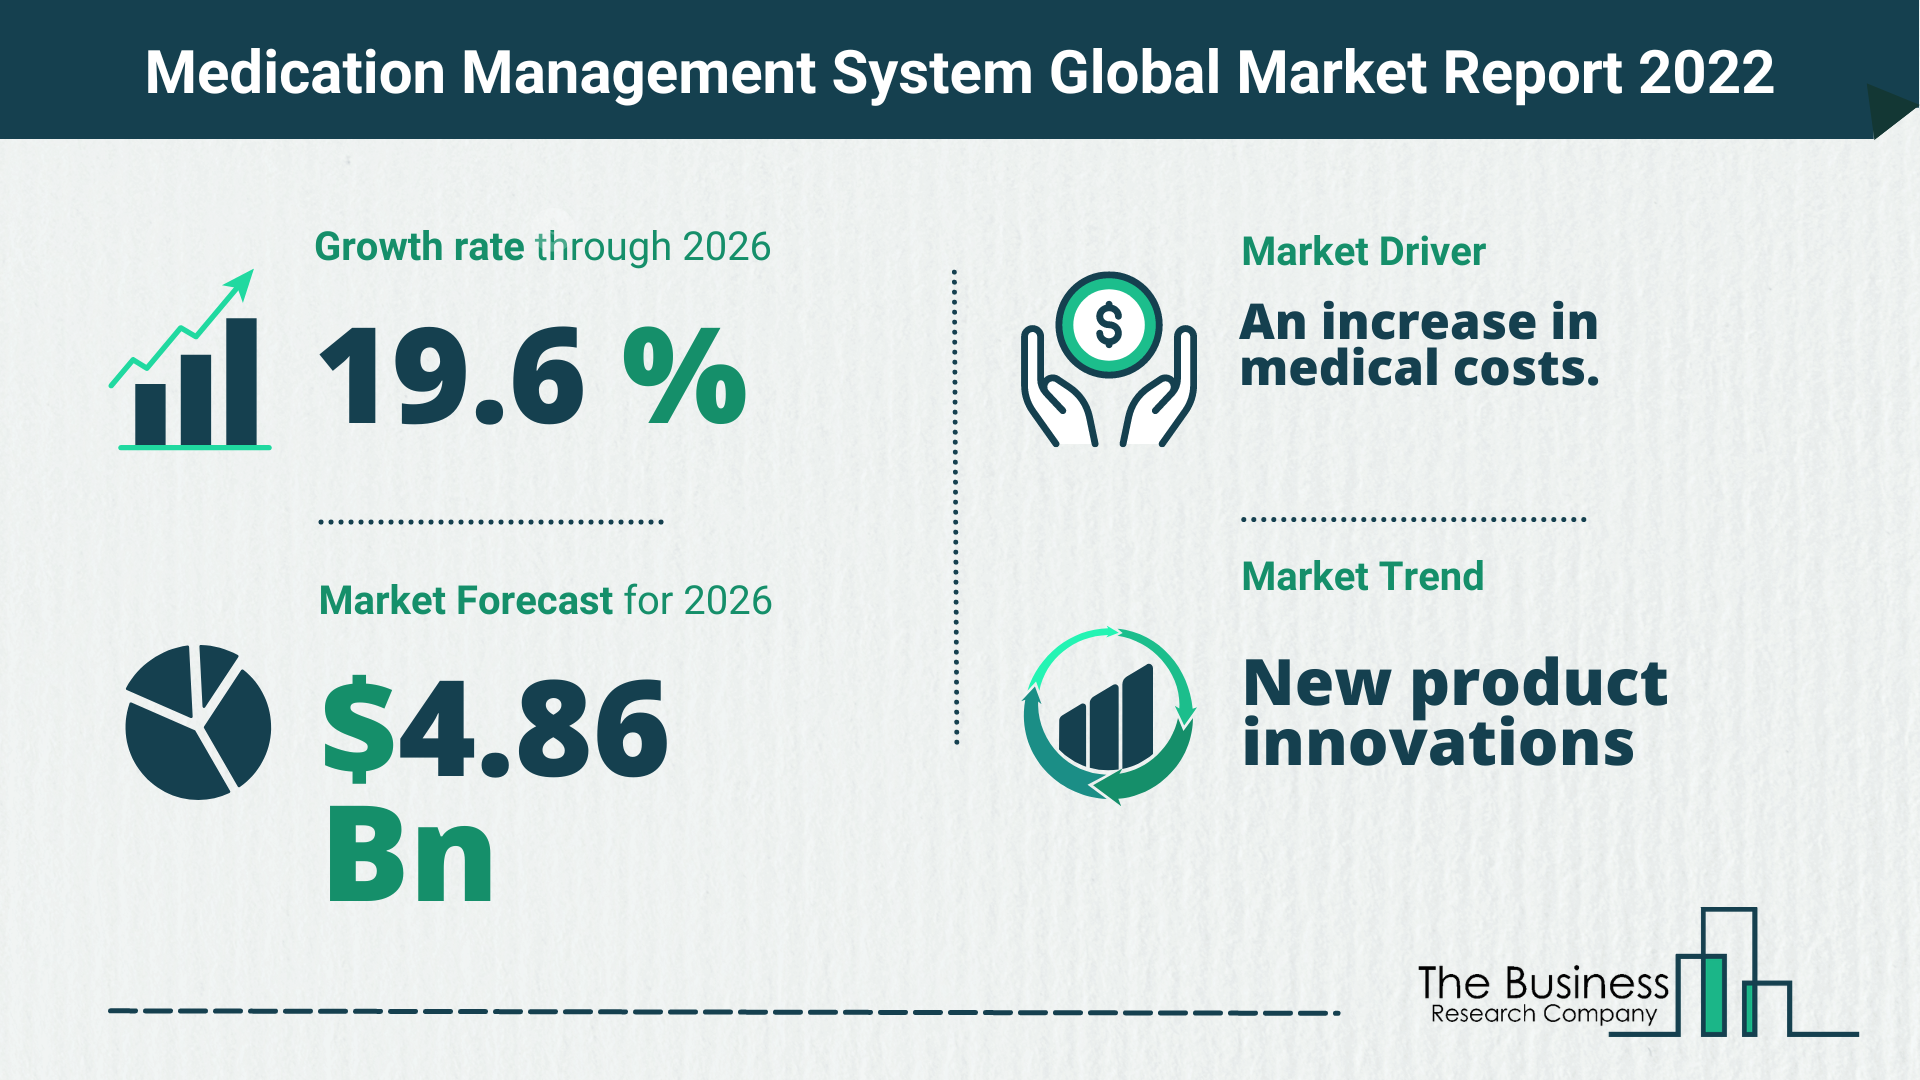 What Is The Medication Management System Market Overview In 2022?